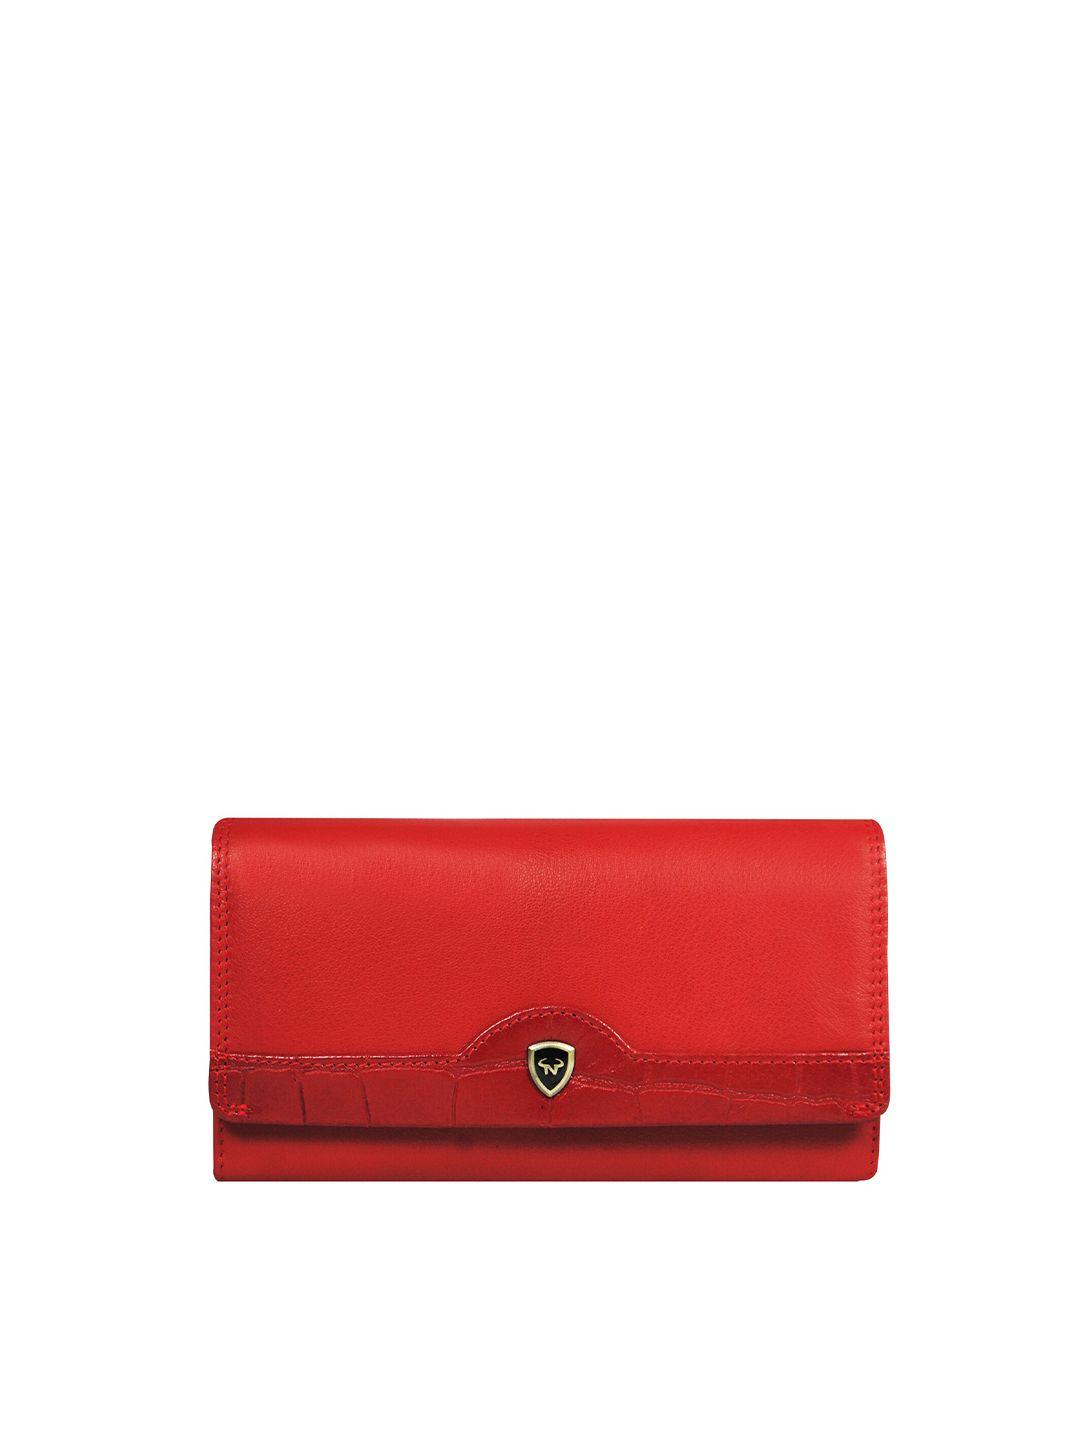 calfnero women red leather two fold wallet